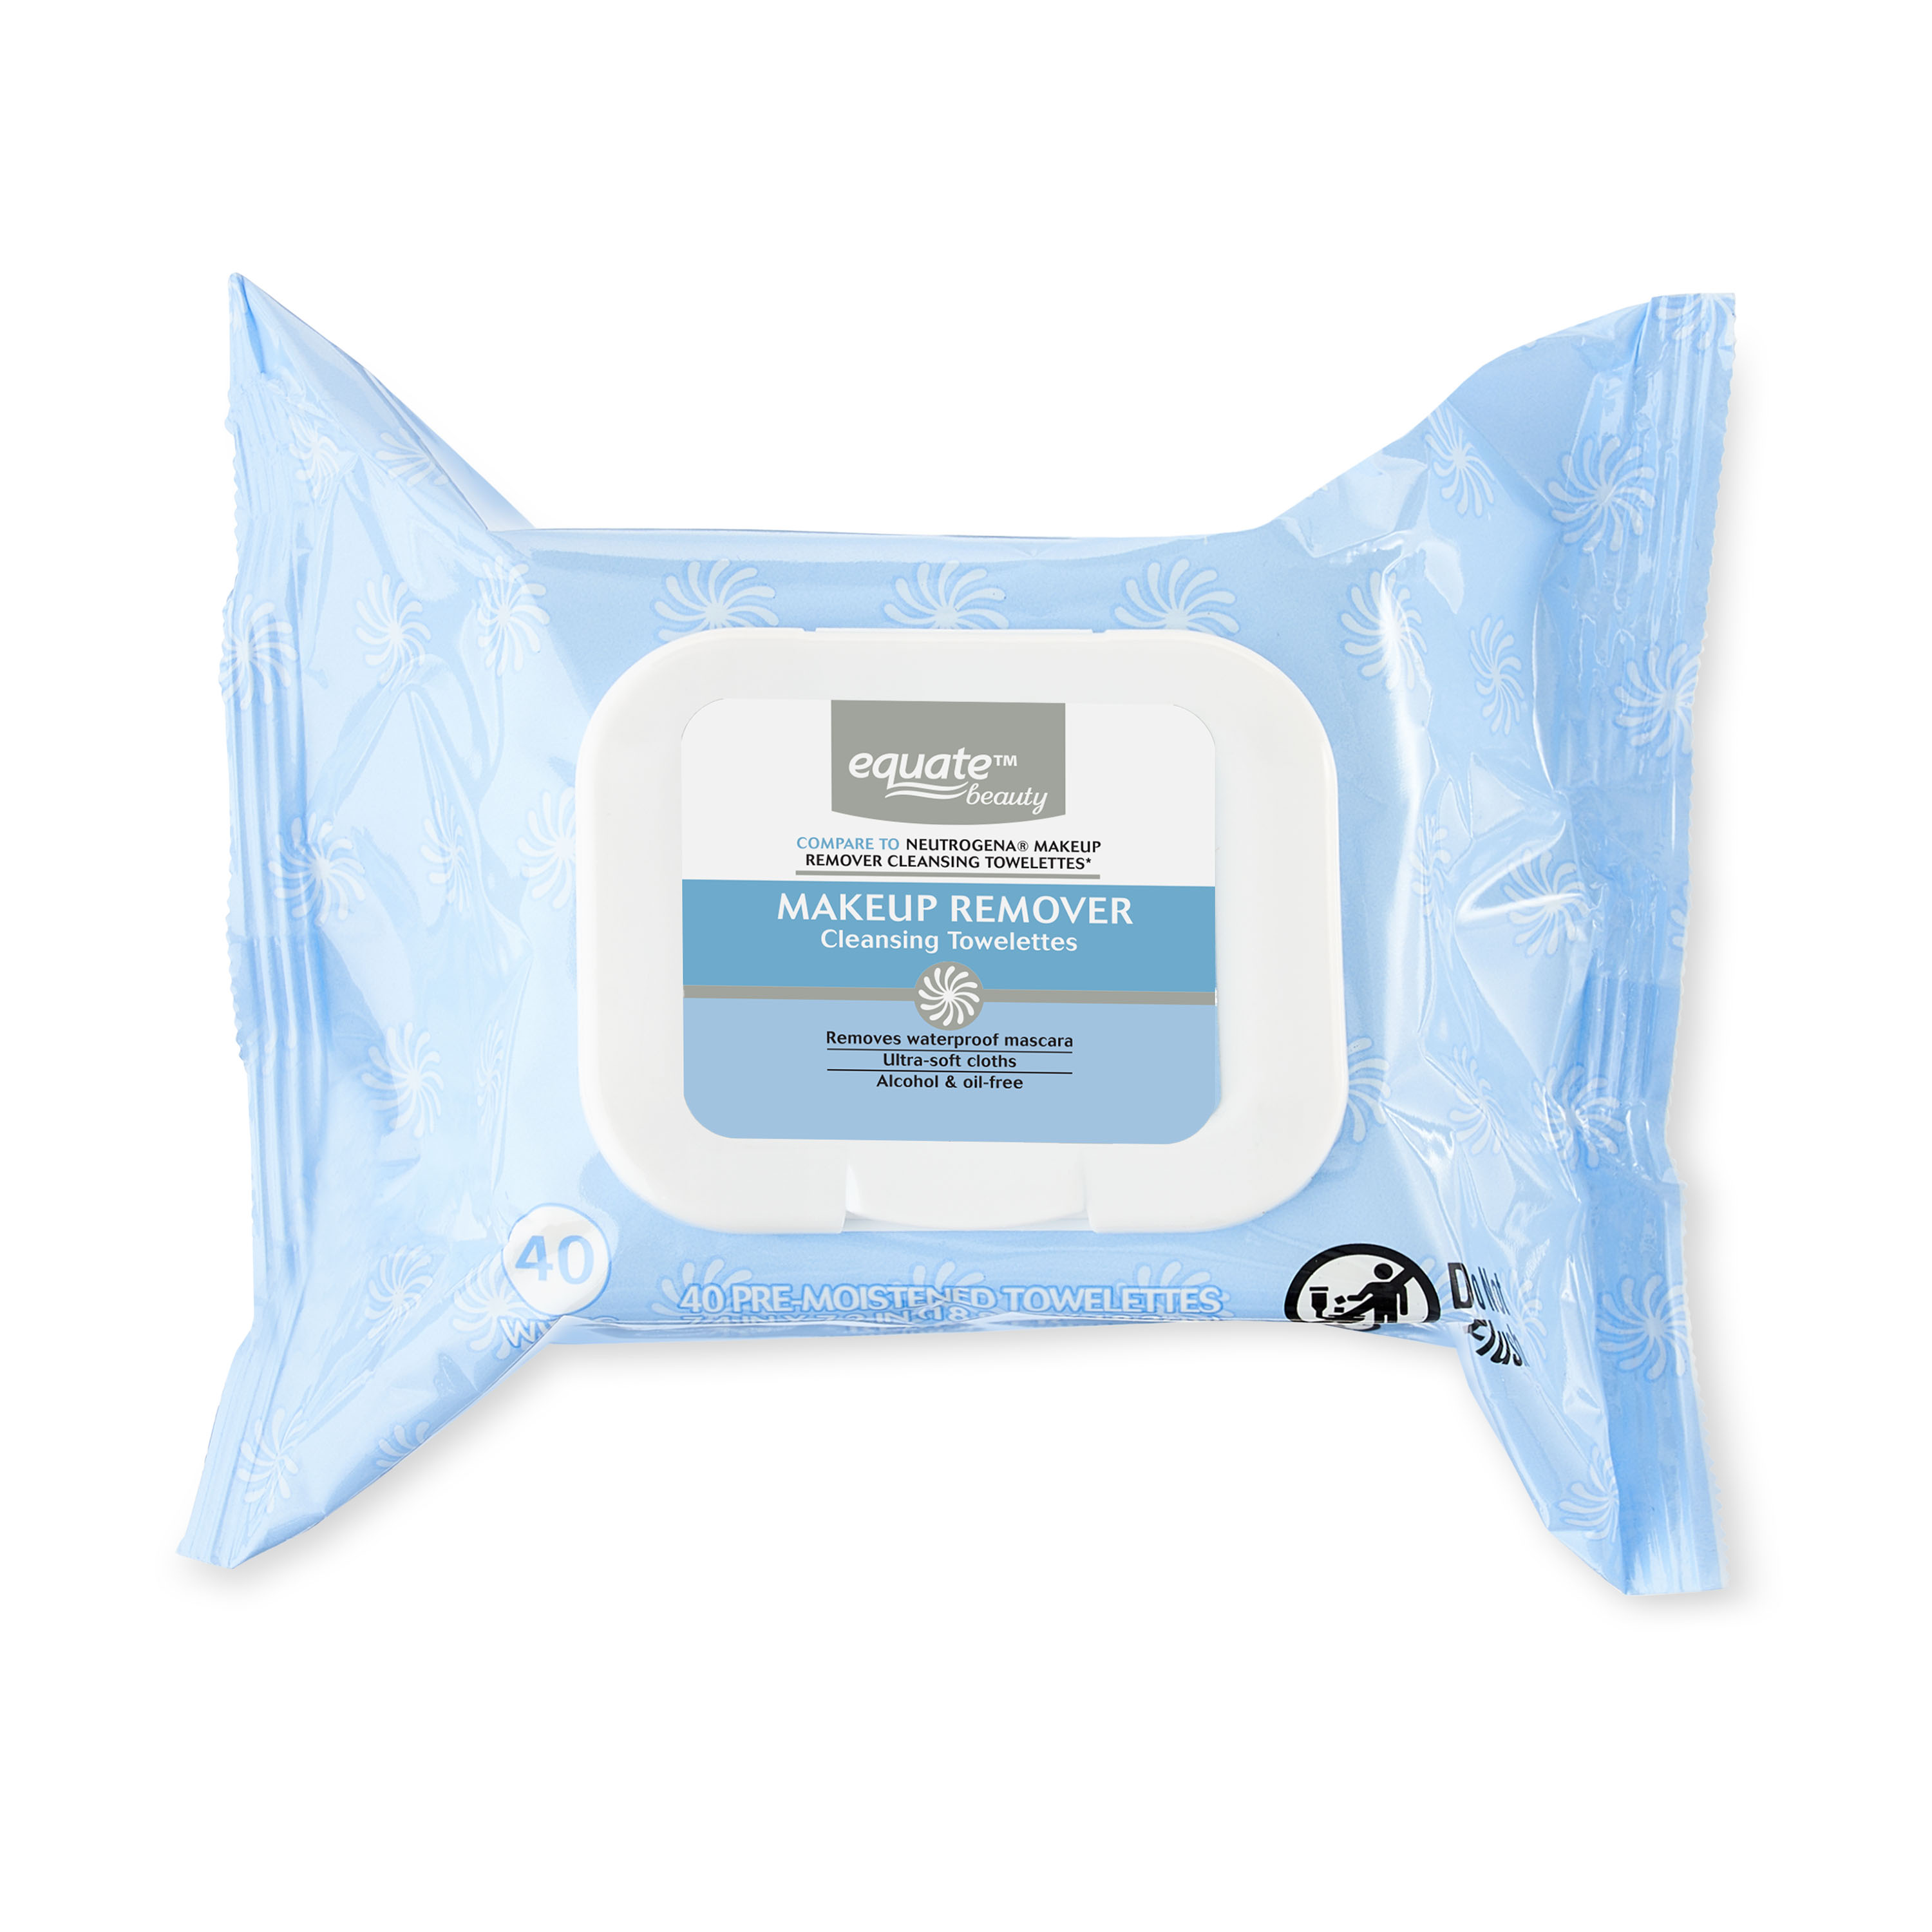 Equate Beauty Makeup Remover Cleansing Towelettes, 40 Towelettes - image 1 of 7